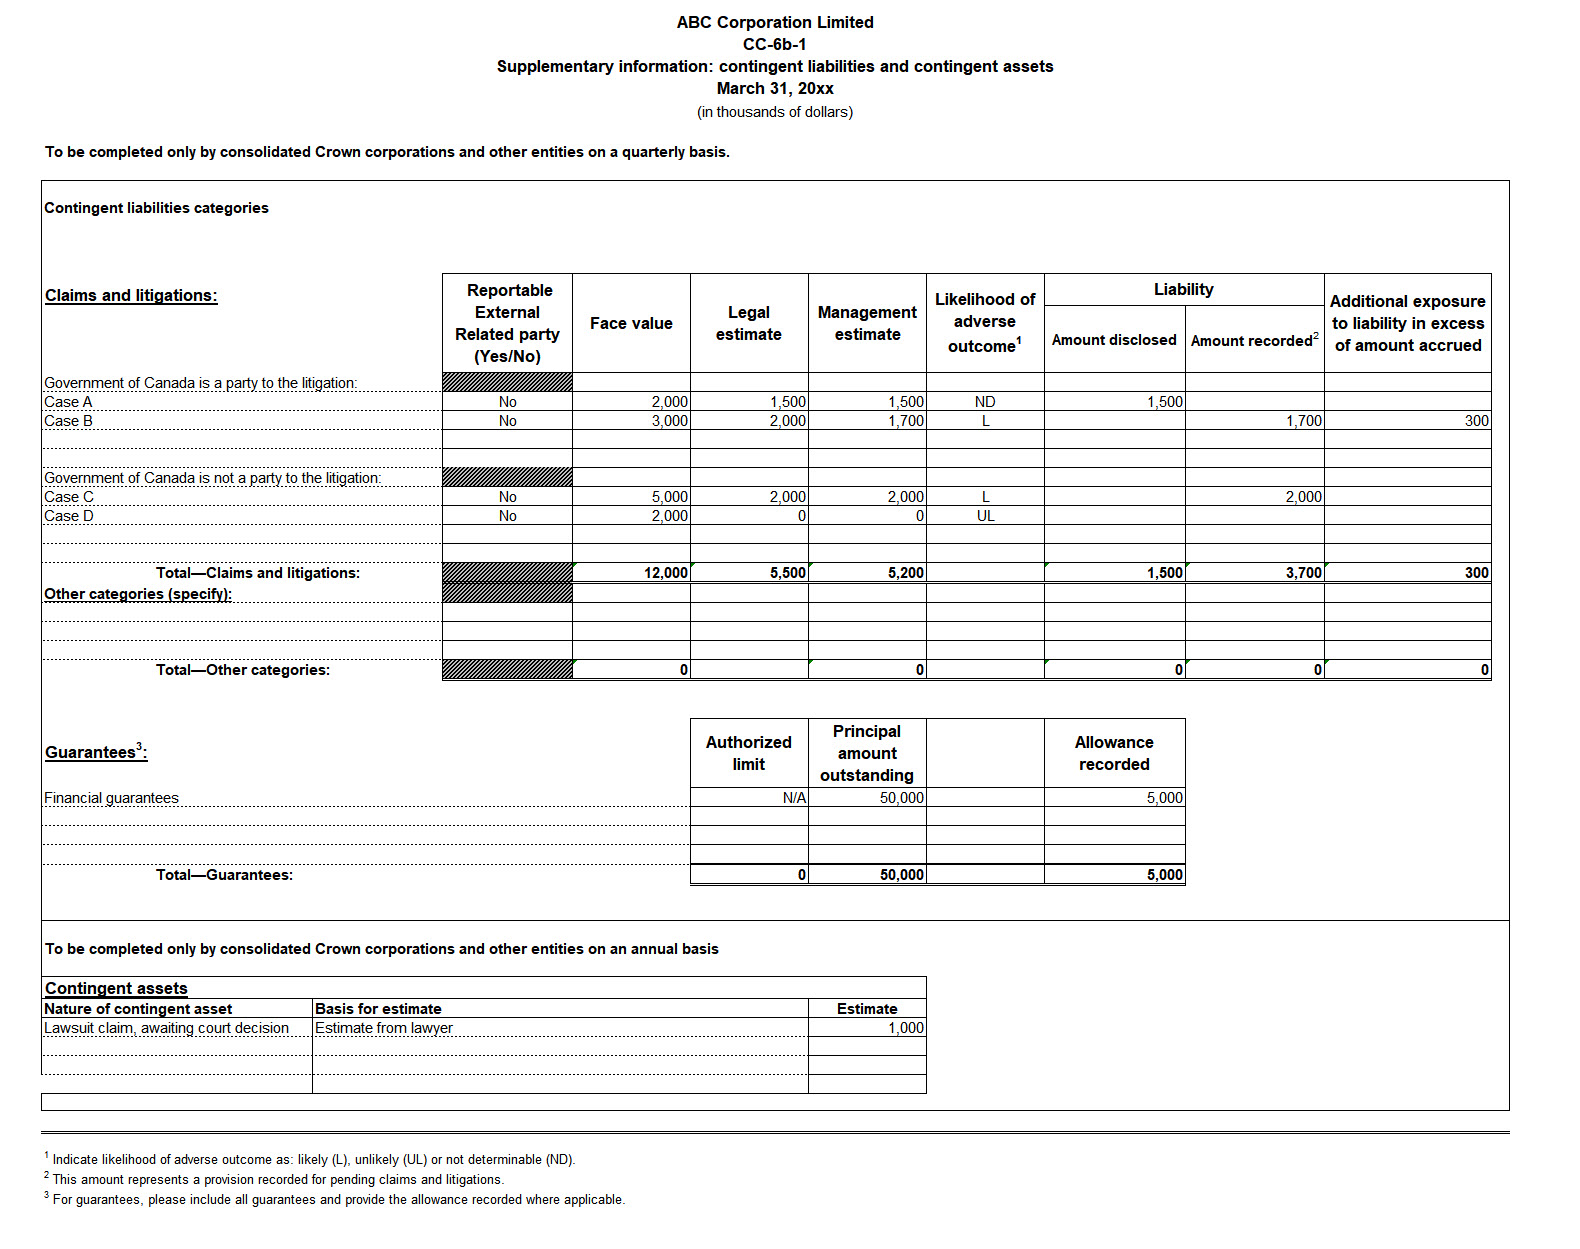 Screen capture of Form CC-6b-1: Supplementary information—Contingent liabilities and contingent assets - Text version below the image